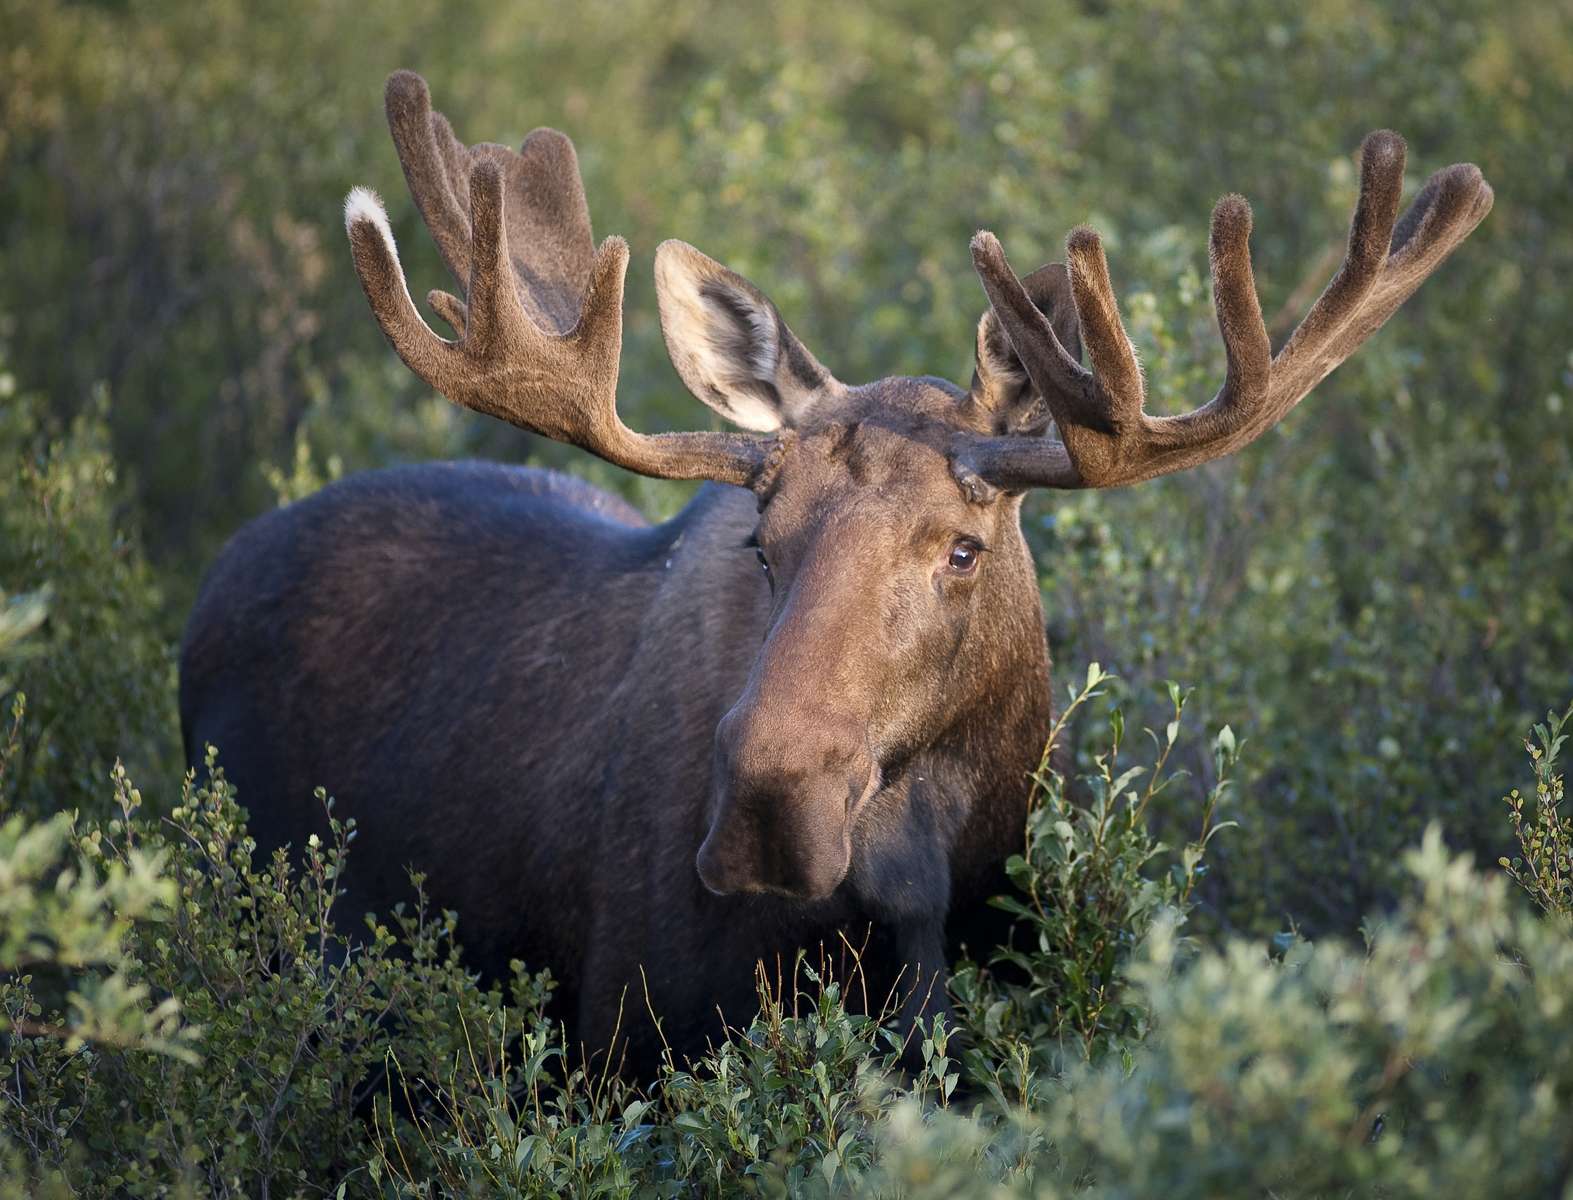 moose competition puzzle online from photo